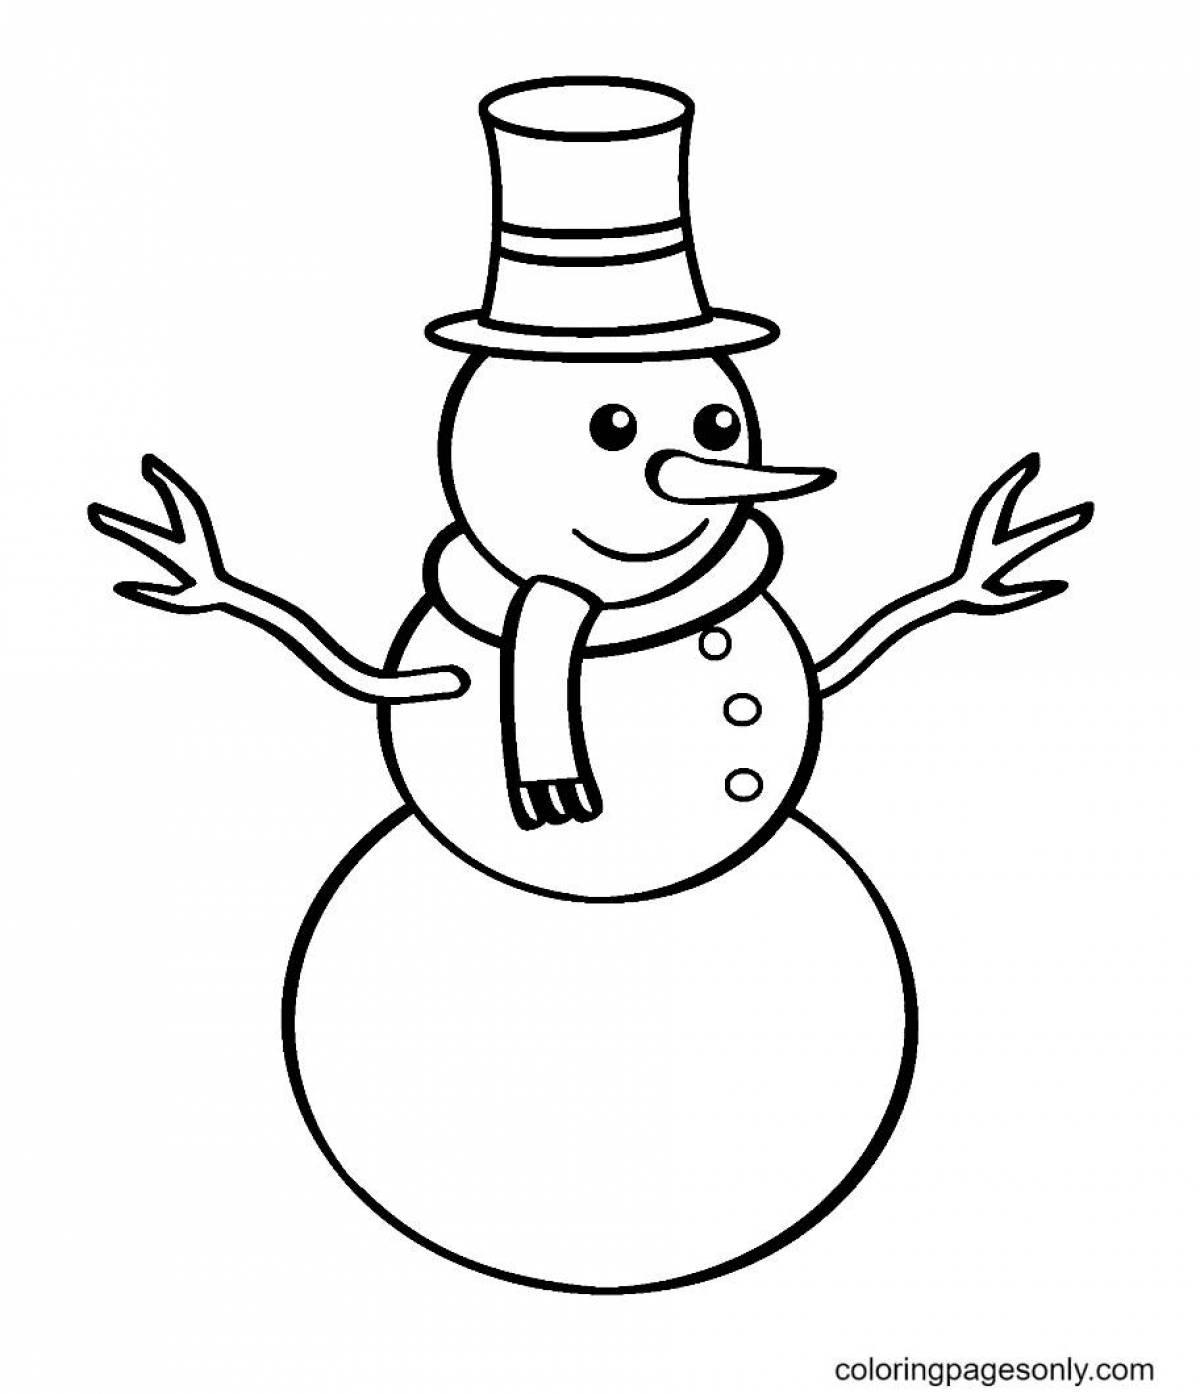 Incredible snowman coloring book for kids